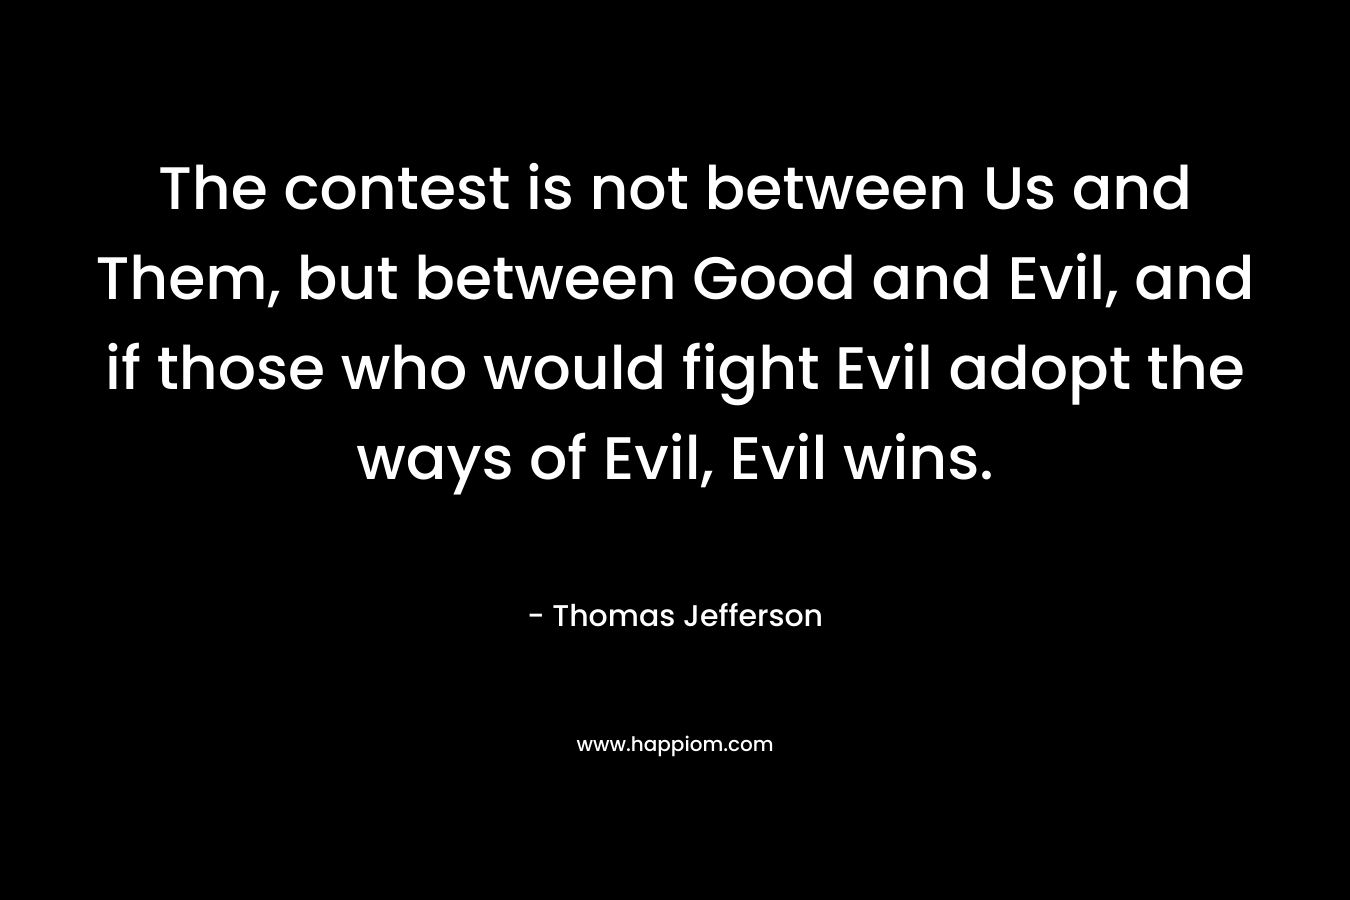 The contest is not between Us and Them, but between Good and Evil, and if those who would fight Evil adopt the ways of Evil, Evil wins.